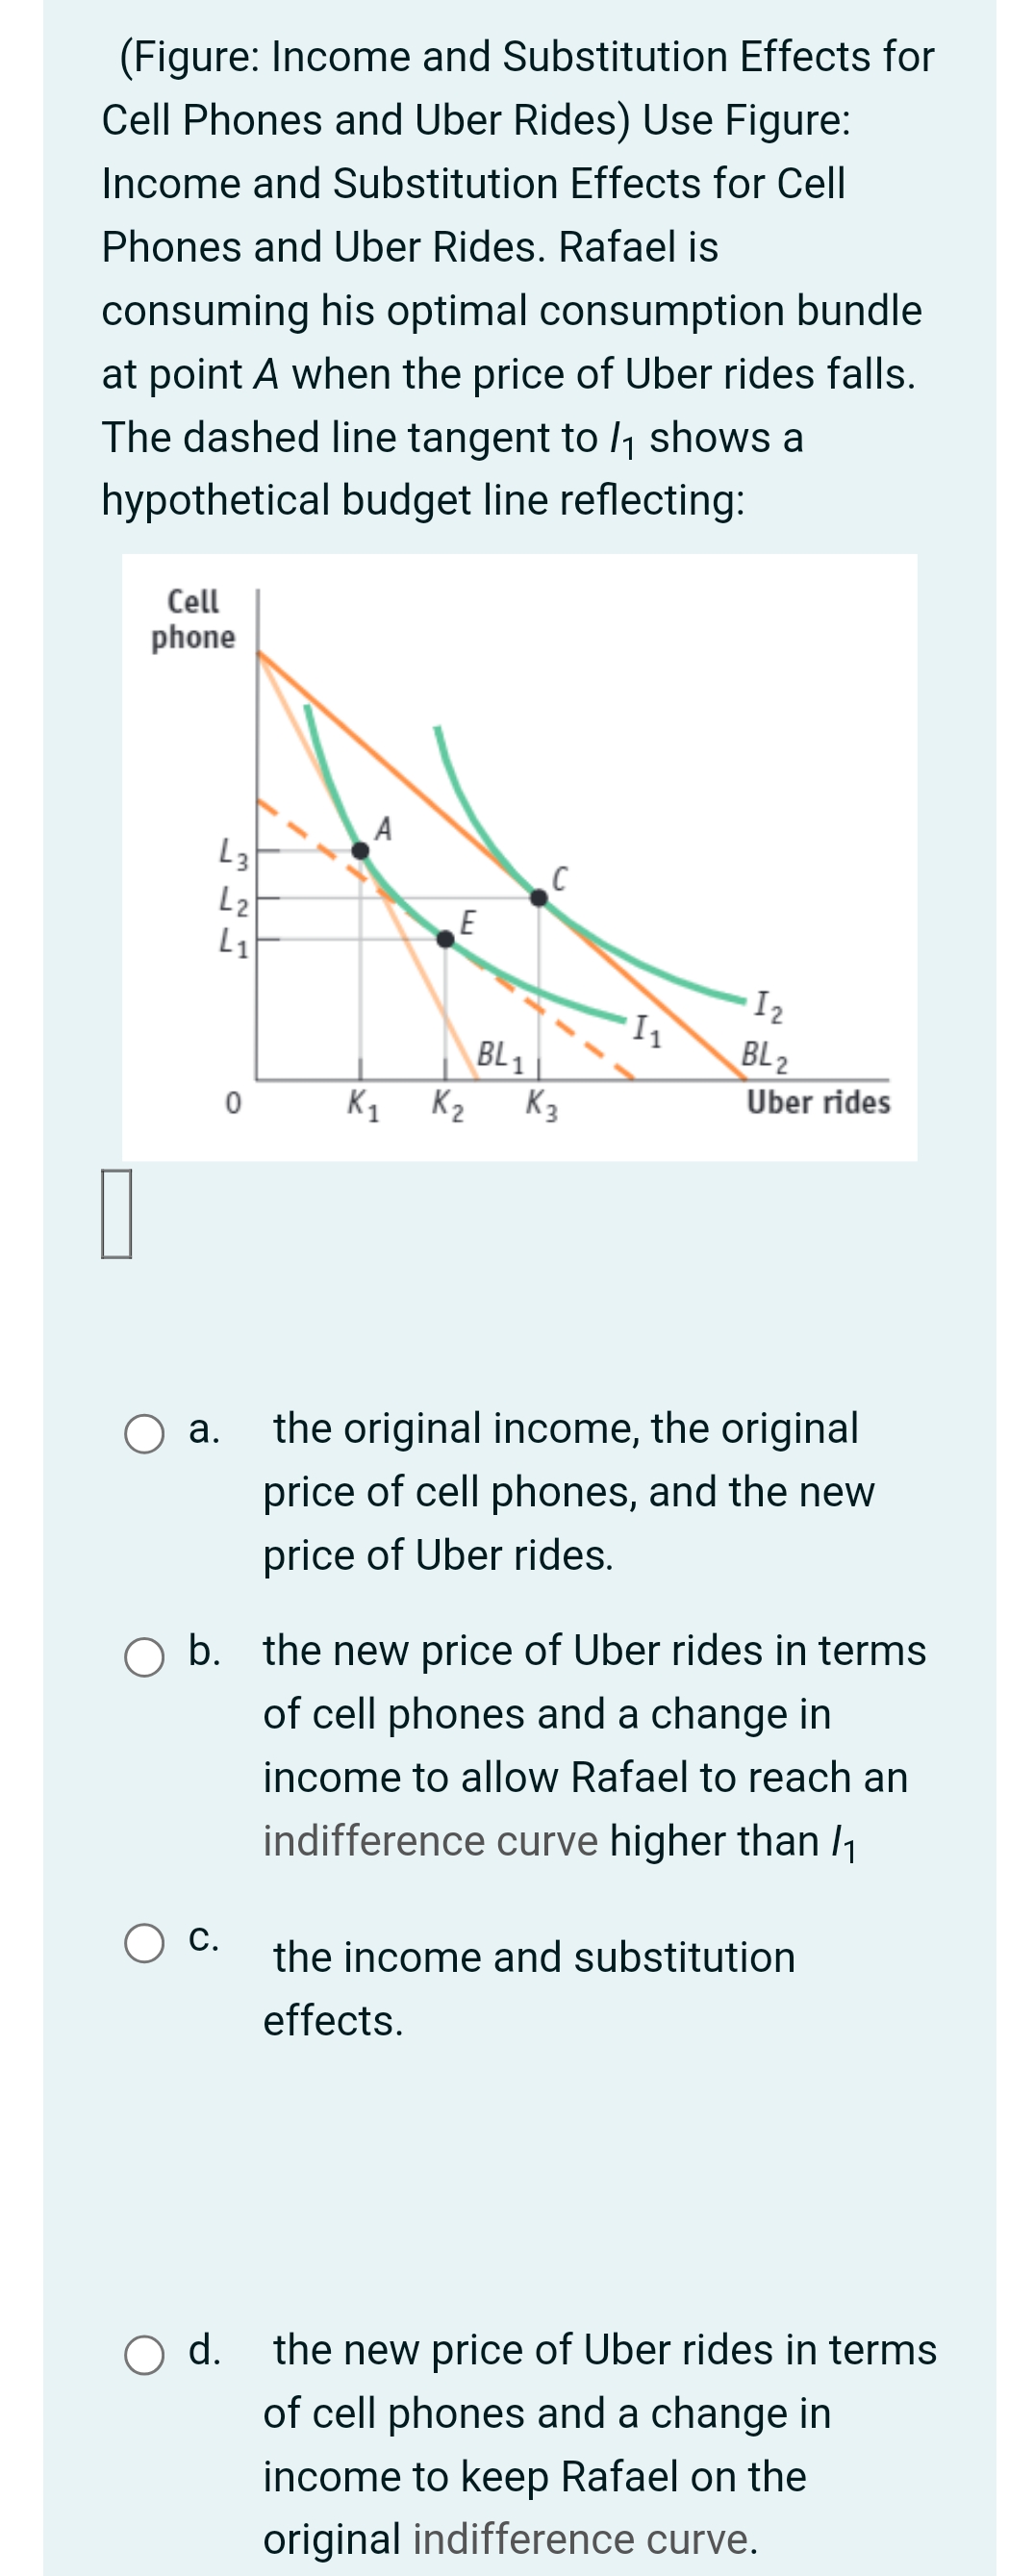 (Figure: Income and Substitution Effects for
Cell Phones and Uber Rides) Use Figure:
Income and Substitution Effects for Cell
Phones and Uber Rides. Rafael is
consuming his optimal consumption bundle
at point A when the price of Uber rides falls.
The dashed line tangent to /₁ shows a
hypothetical budget line reflecting:
Cell
phone
L3
L₂
4₁
O a.
C.
327
O d.
0
A
E
K1 K2
BL1
C
K₂
1₁
1₂
BL 2
Uber rides
O b. the new price of Uber rides in terms
of cell phones and a change in
income to allow Rafael to reach an
indifference curve higher than /₁
the original income, the original
price of cell phones, and the new
price of Uber rides.
the income and substitution
effects.
the new price of Uber rides in terms
of cell phones and a change in
income to keep Rafael on the
original indifference curve.